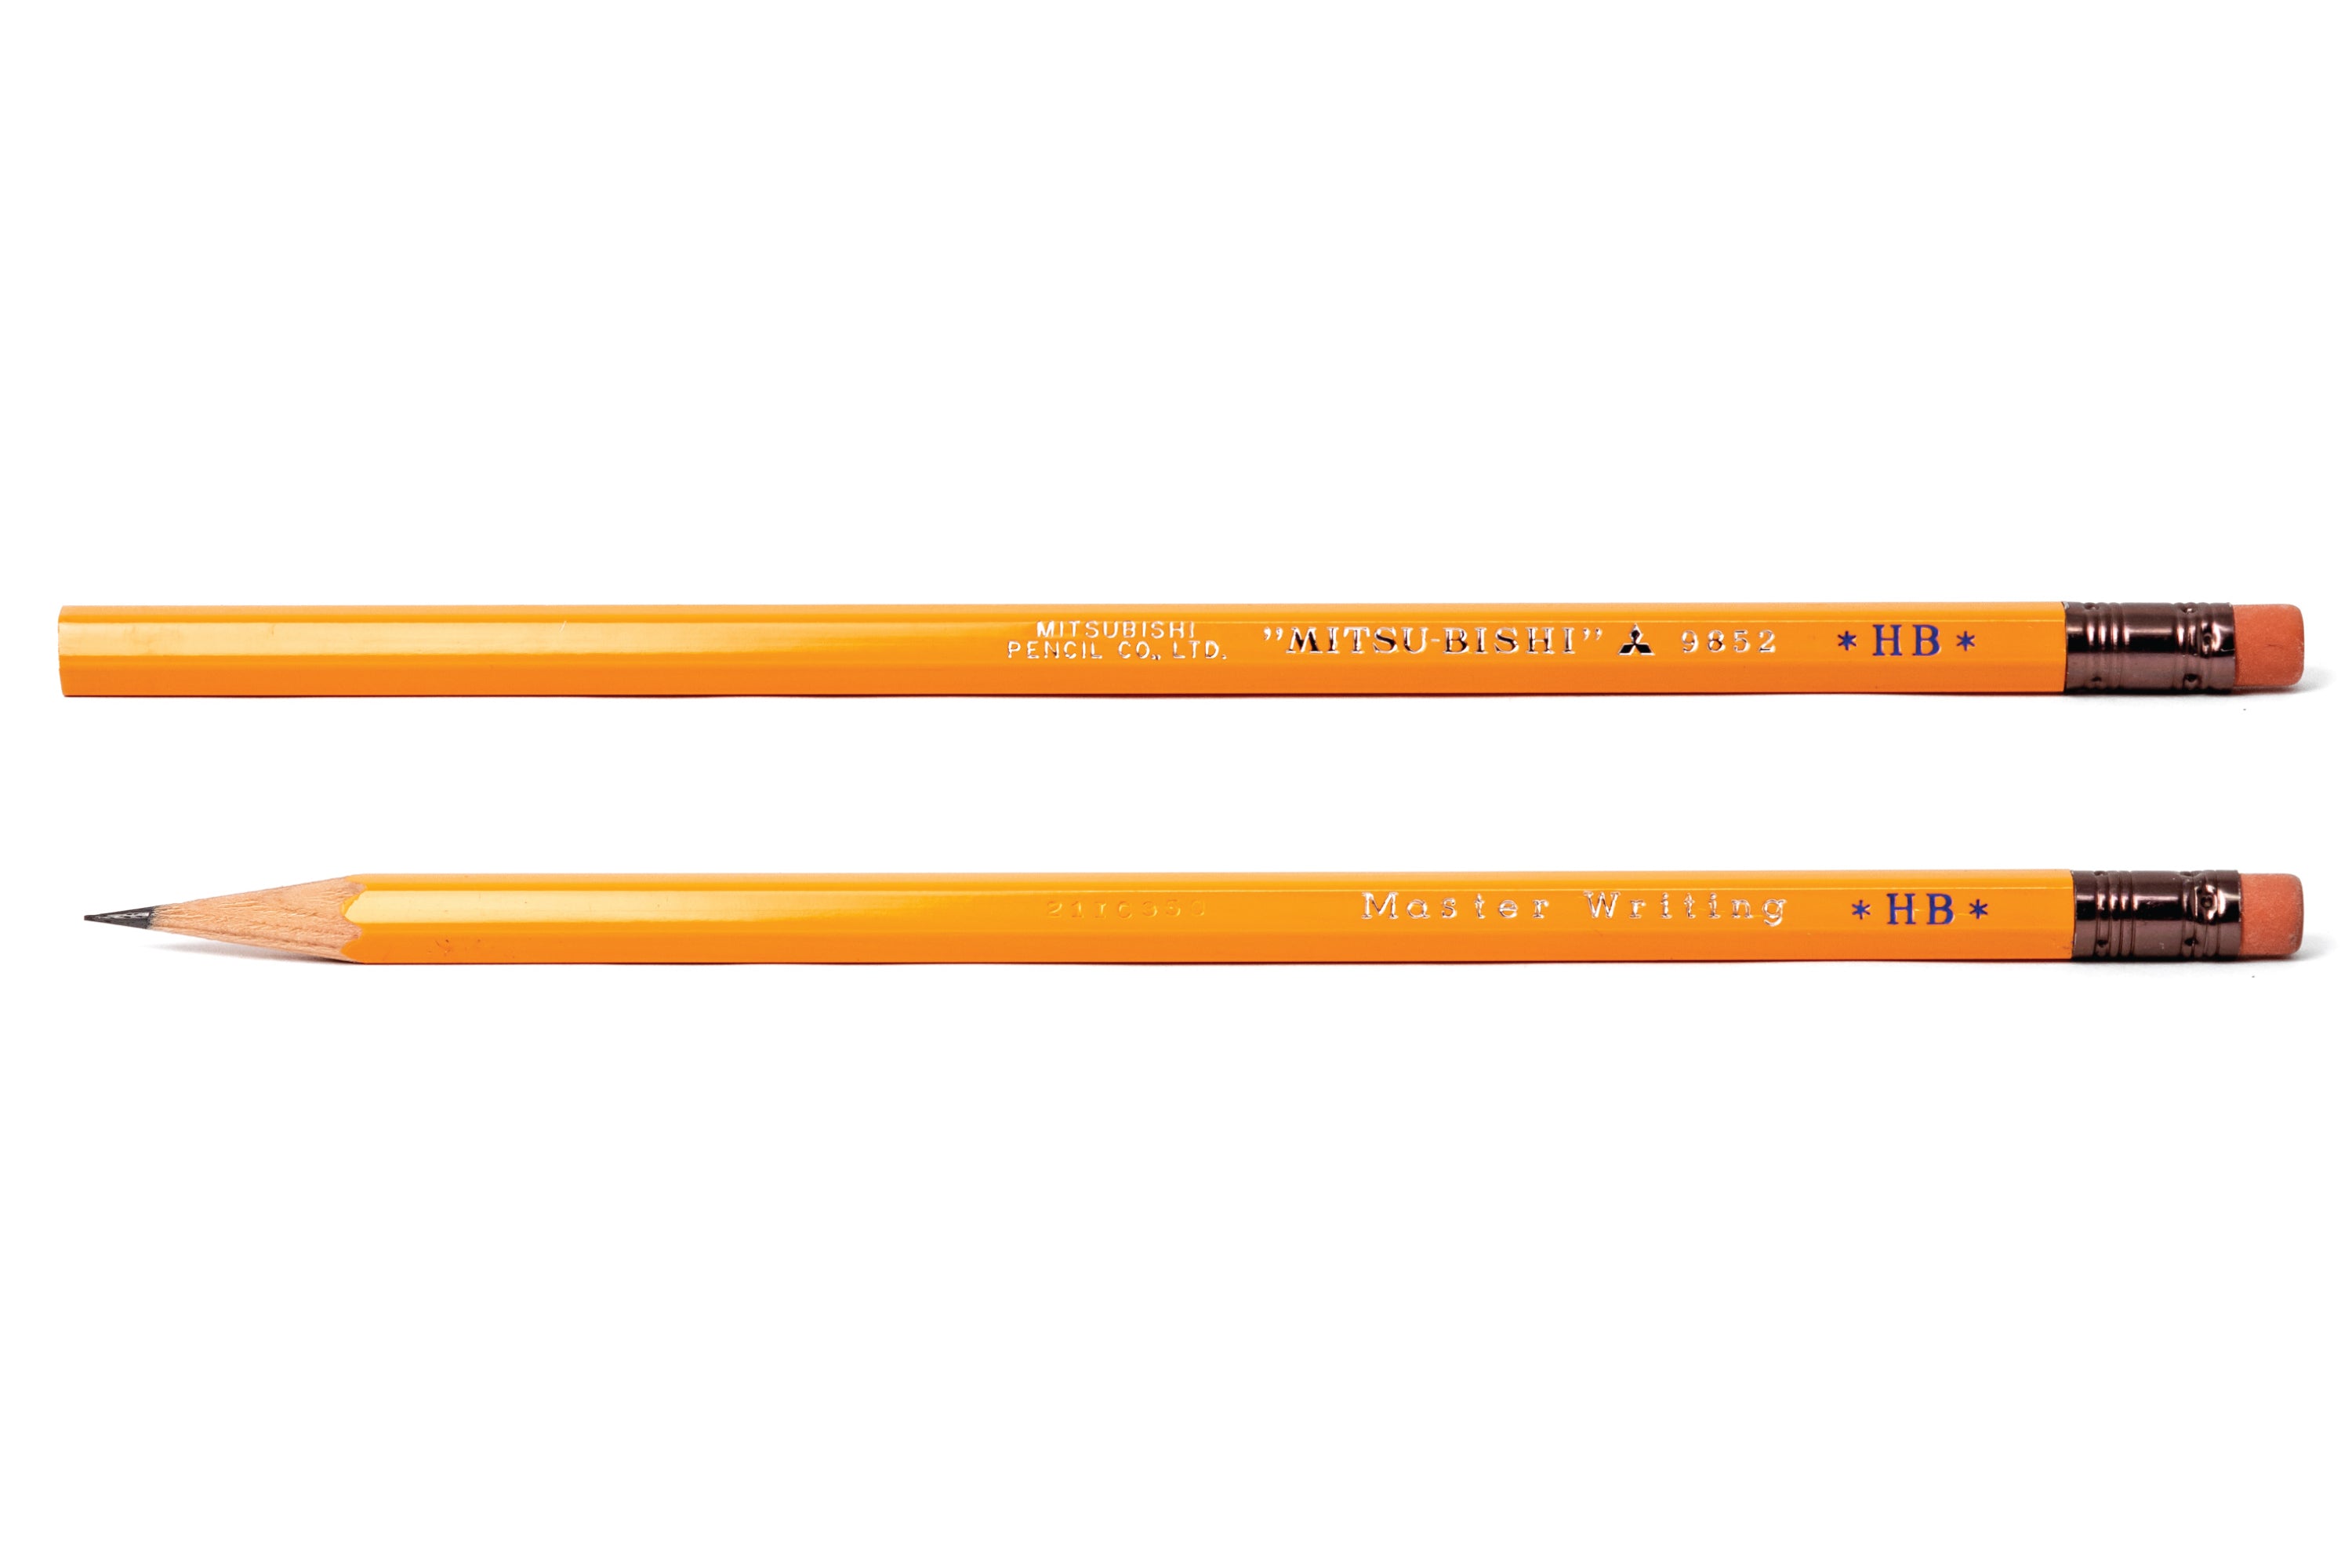 Mitsubishi 9850 HB Pencils — Two Hands Paperie